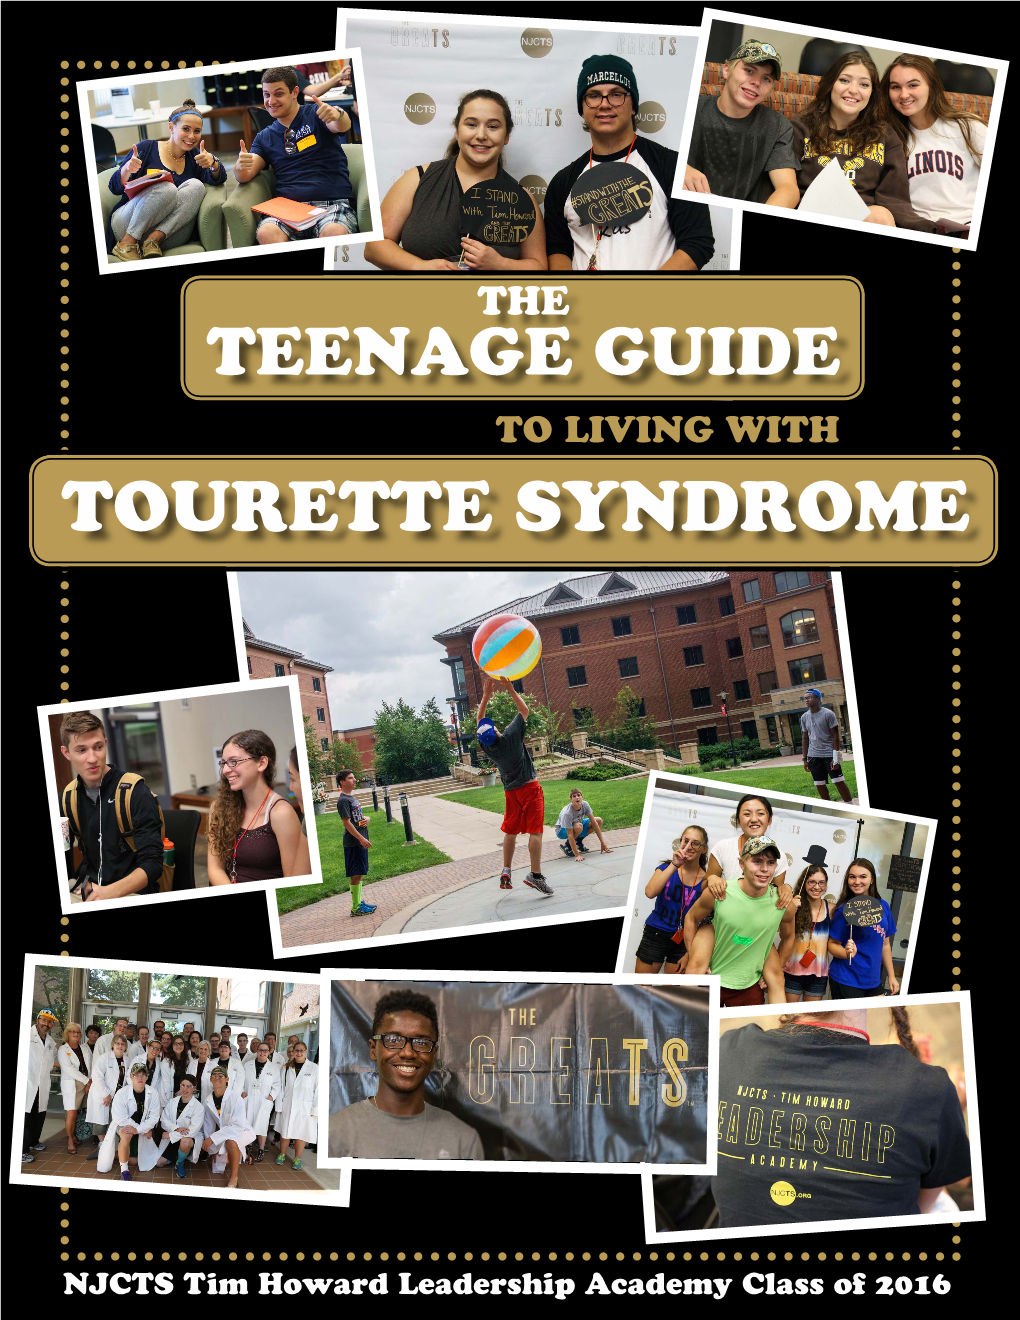 The Teenage Guide to Living with Tourette Syndrome